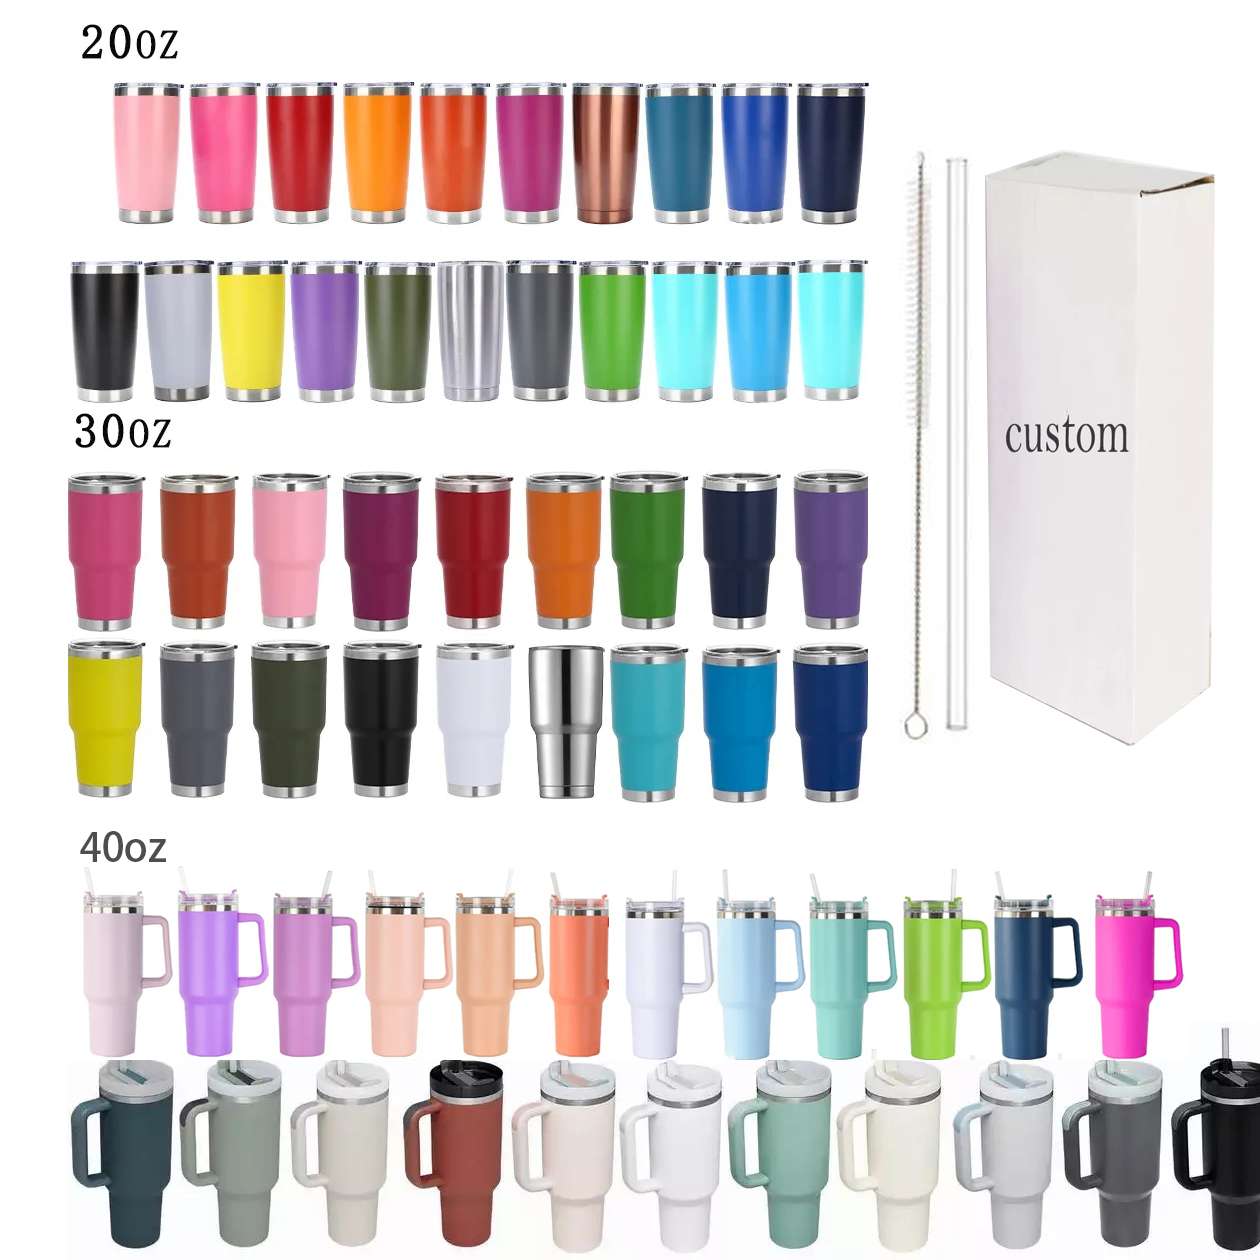 30oz High Quality Insulated Tumblers with Lid Portable Stainless Steel Cups Thermos Water Bottle